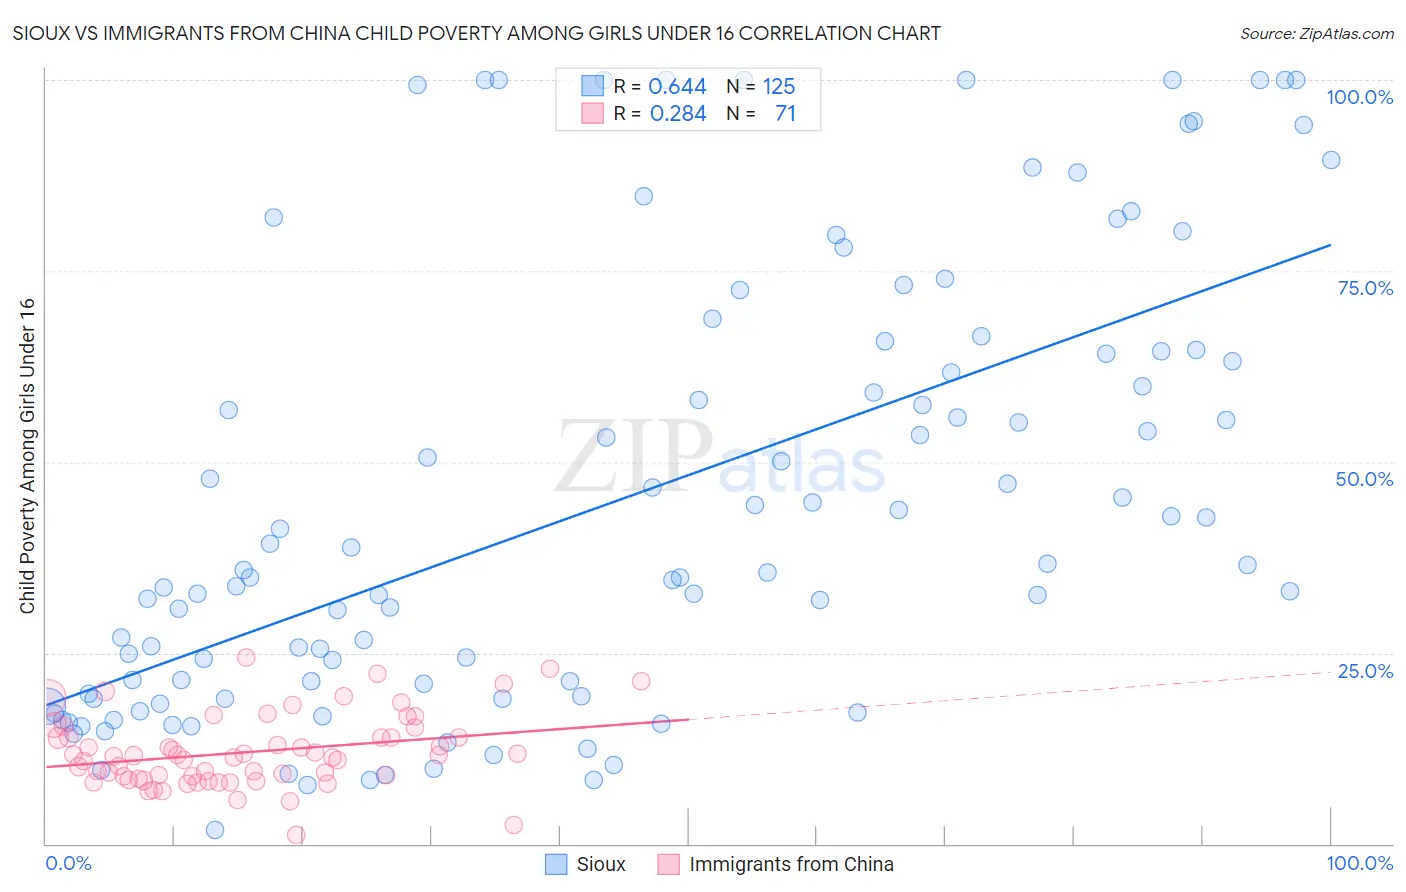 Sioux vs Immigrants from China Child Poverty Among Girls Under 16